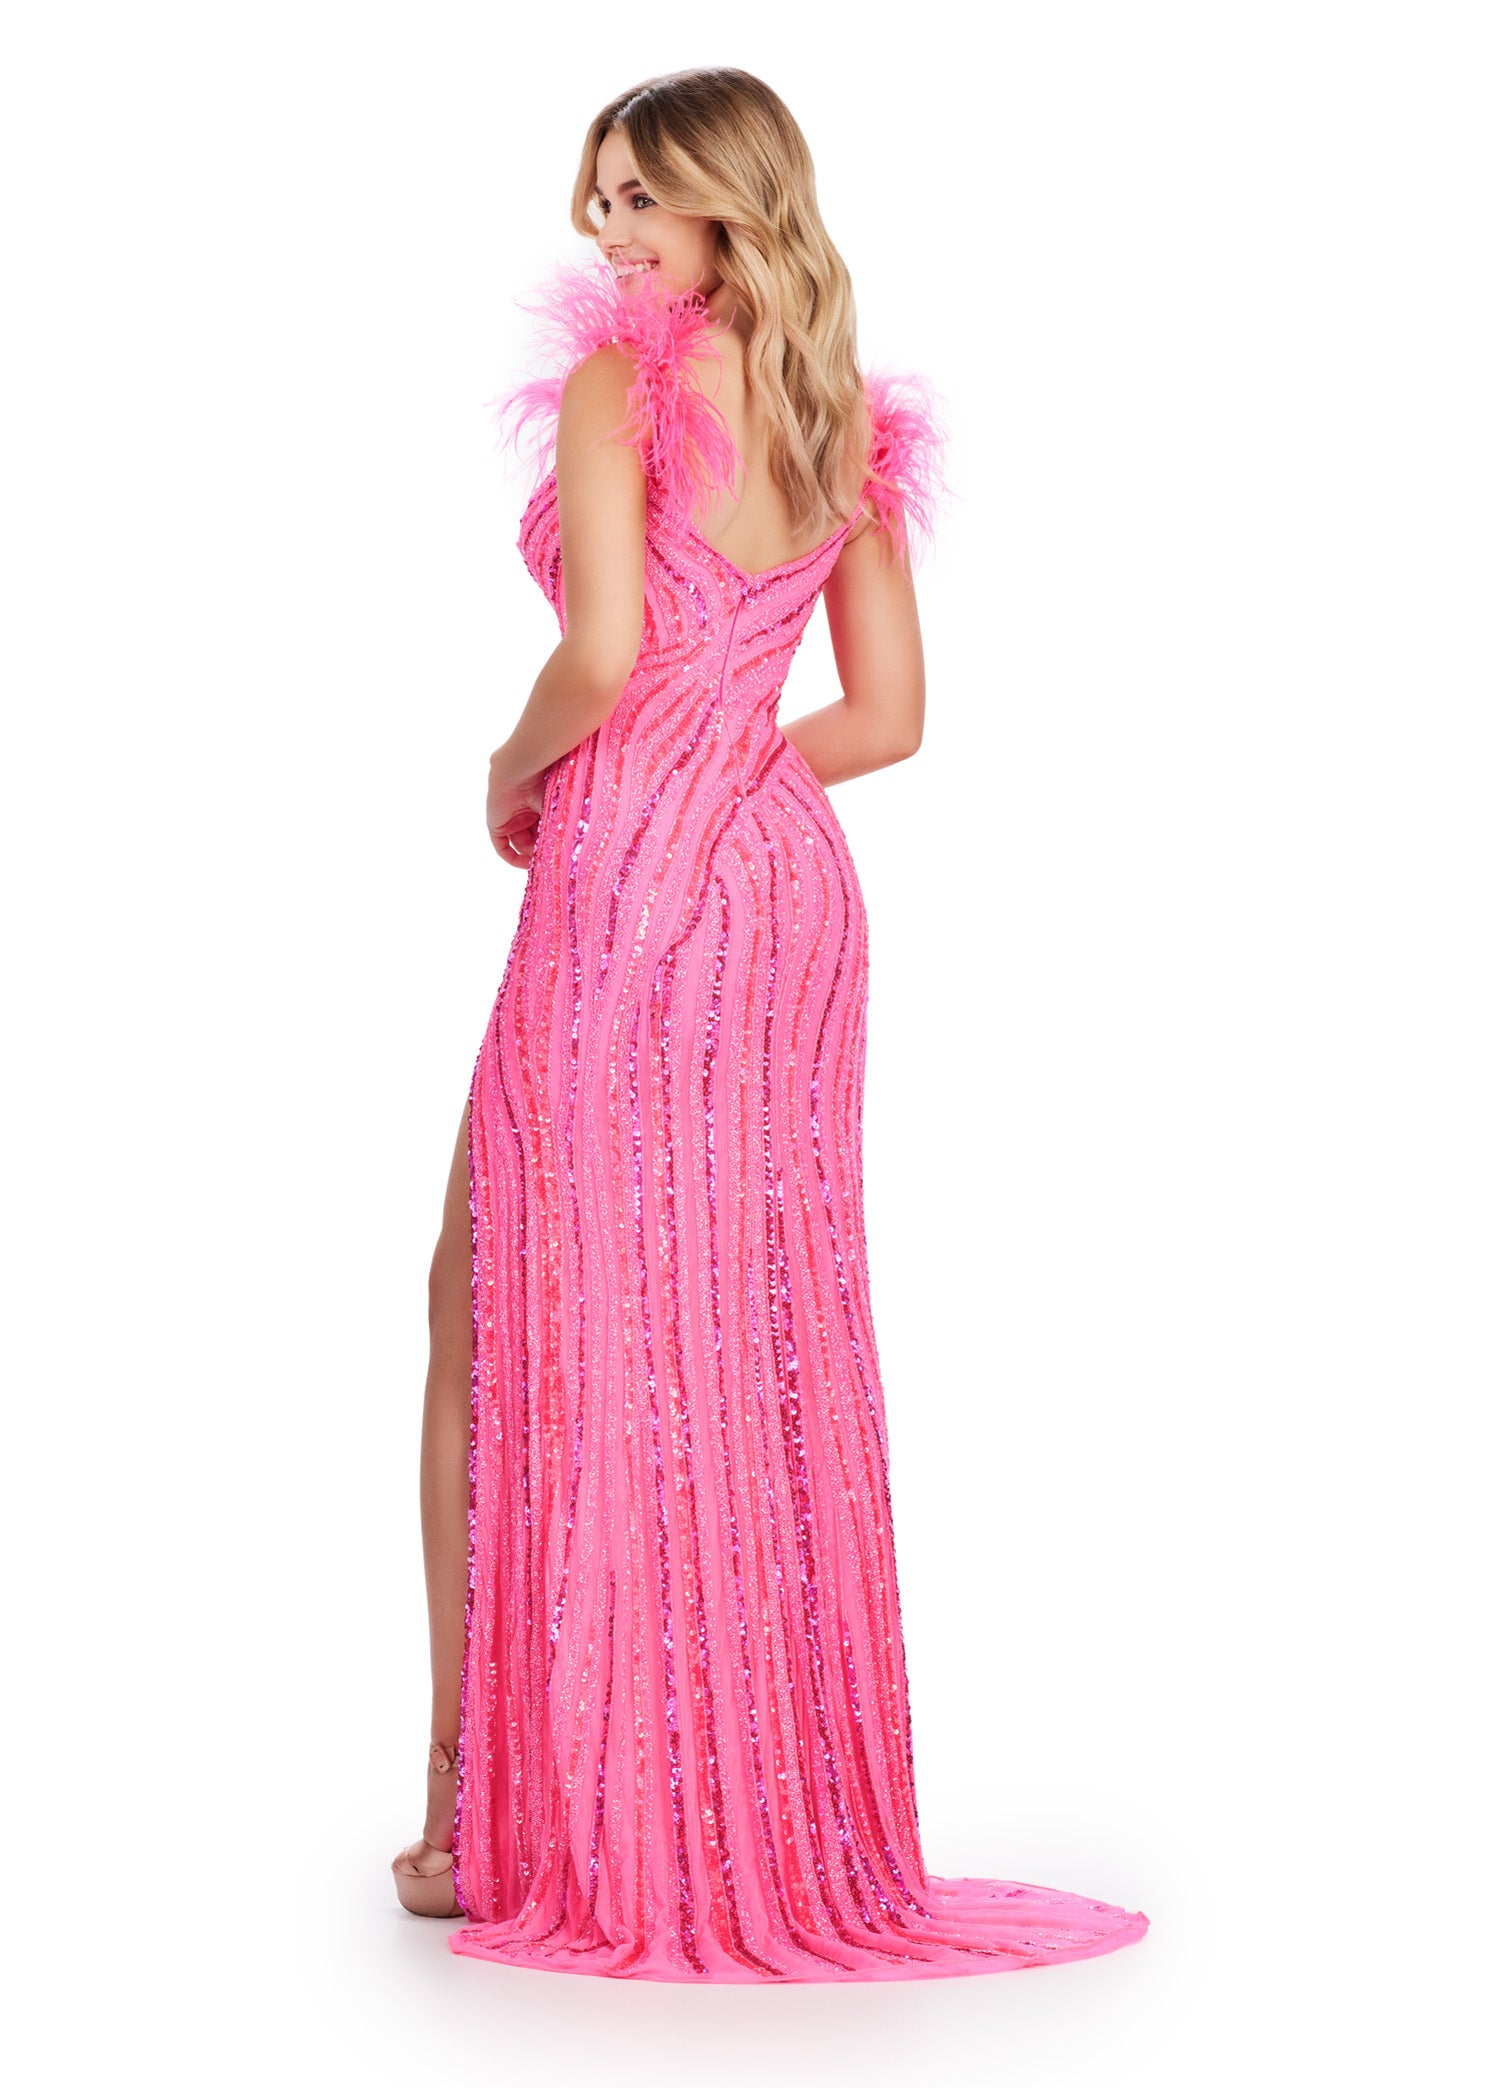 Elevate your style with the Ashley Lauren 11586 Long Prom Dress. This fully beaded dress features feather straps and a formal, pageant-worthy design. With its exquisite detailing and elegant silhouette, this dress will make you stand out and feel confident at your next special event. So glam! This style features a v-neckline complete with feather shoulder details. Intricate beading is scattered throughout the gown.